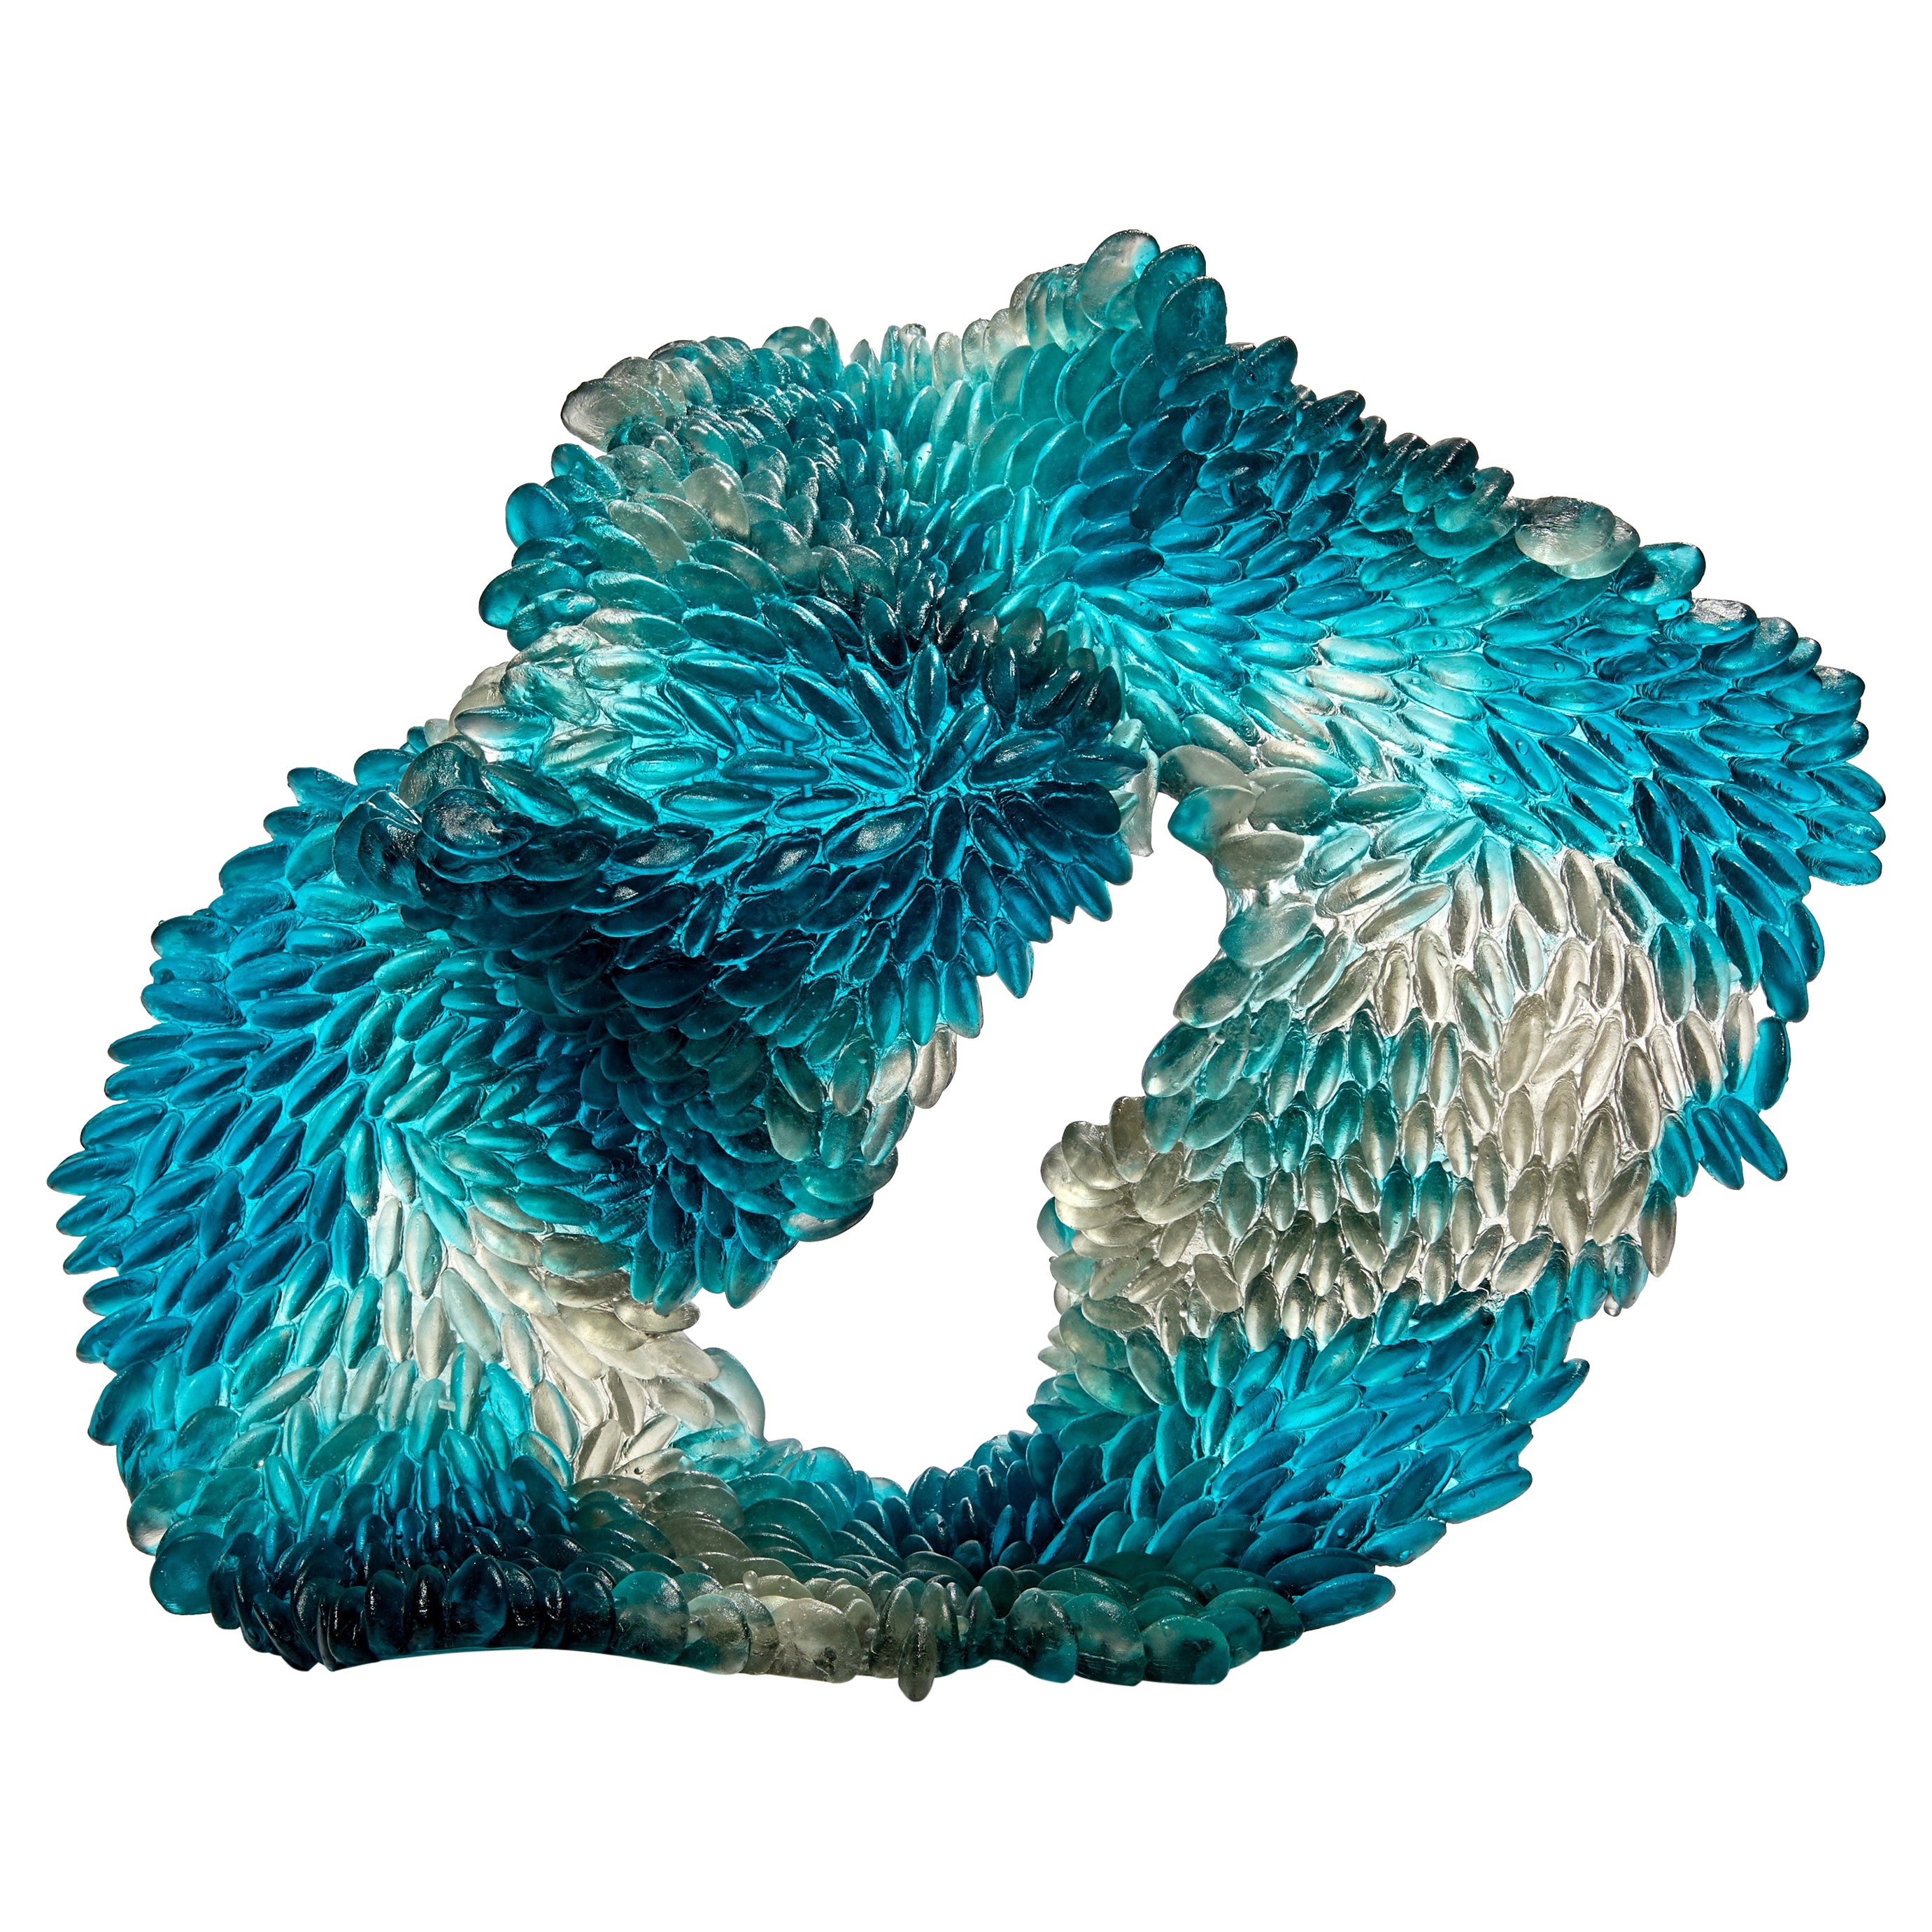  Blue Stain, Unique Glass Sculpture in Teal Blue & Grey by Nina Casson McGarva